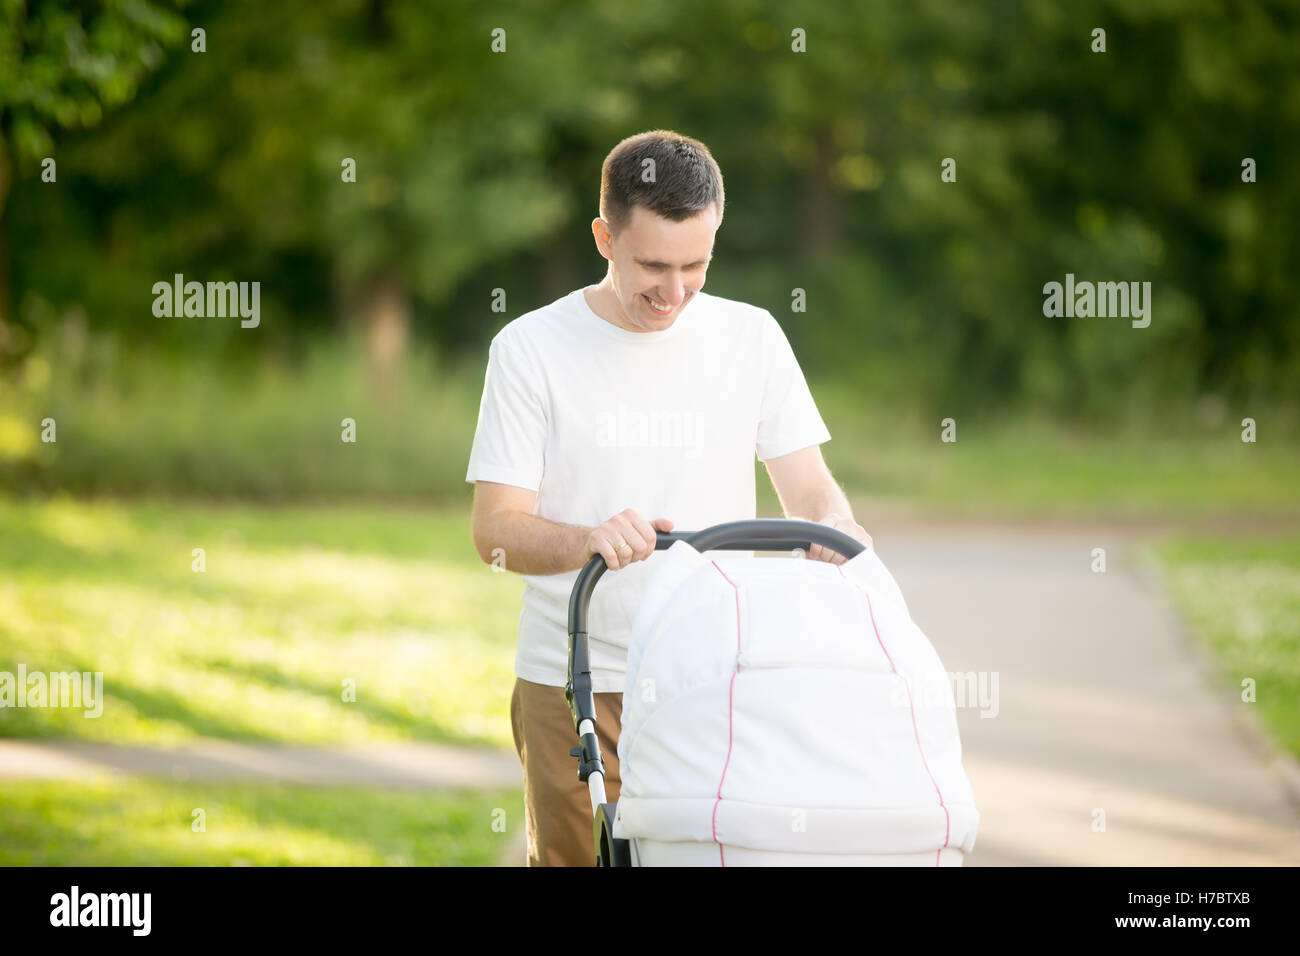 Young father pushing a stroller in park Stock Photo